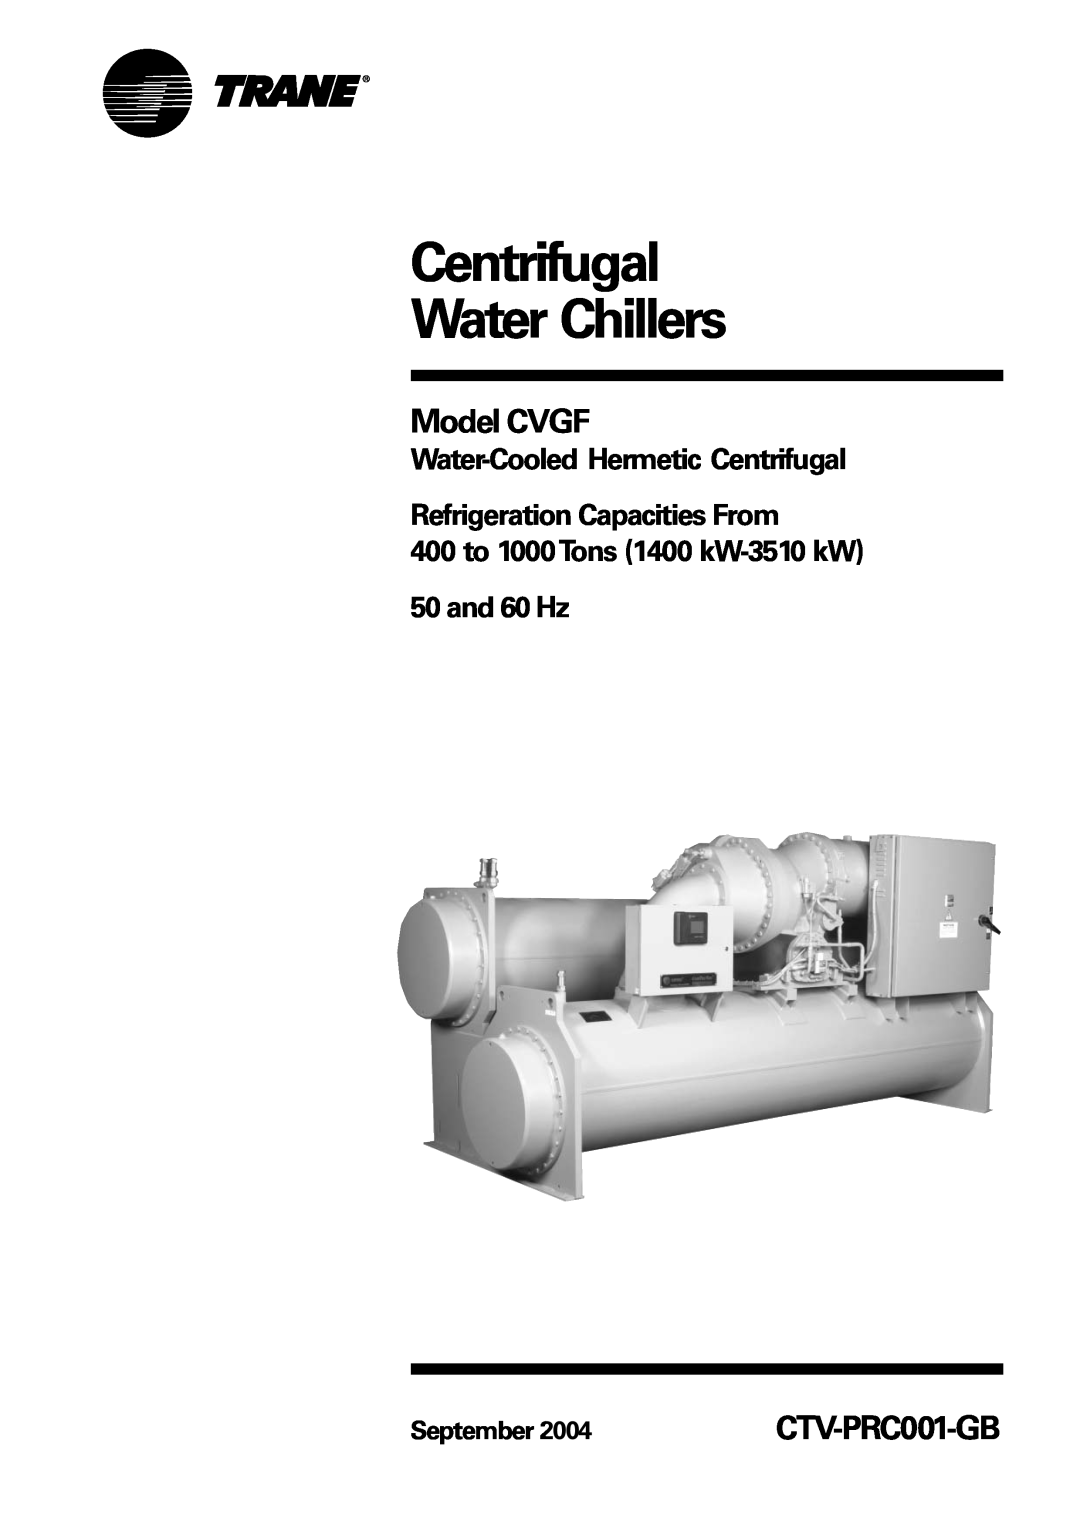 Trane manual Water-CooledHermetic Centrifugal, Refrigeration Capacities From, Centrifugal Water Chillers, Model CVGF 